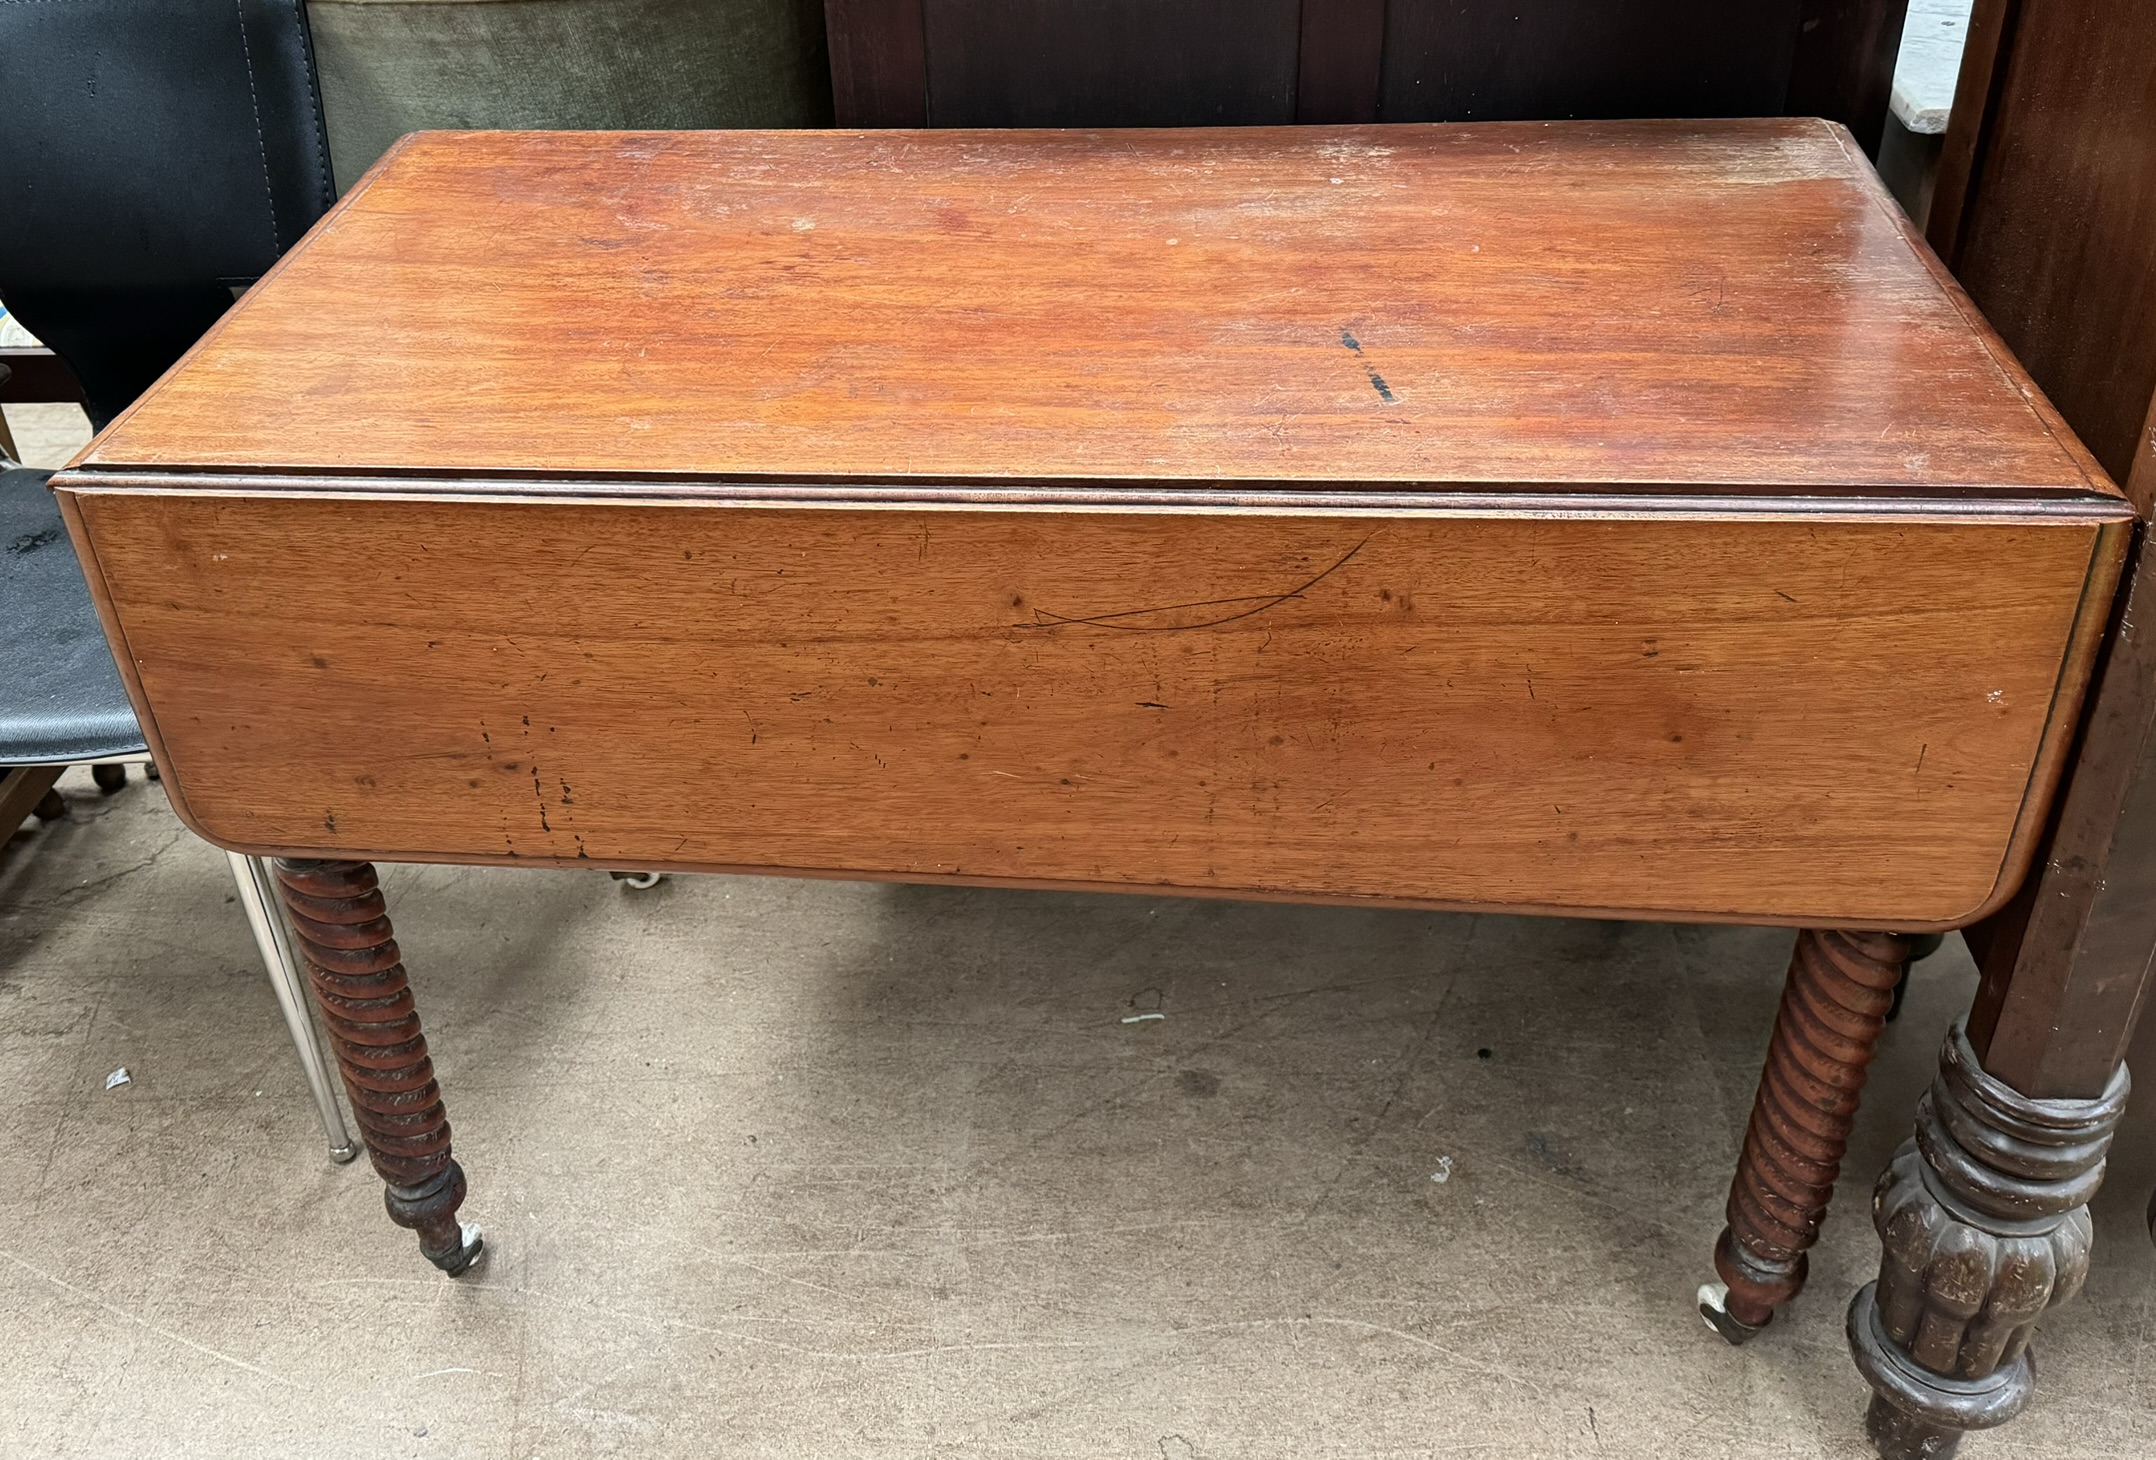 A Victorian mahogany Pembroke table with drop flaps and barley twist legs